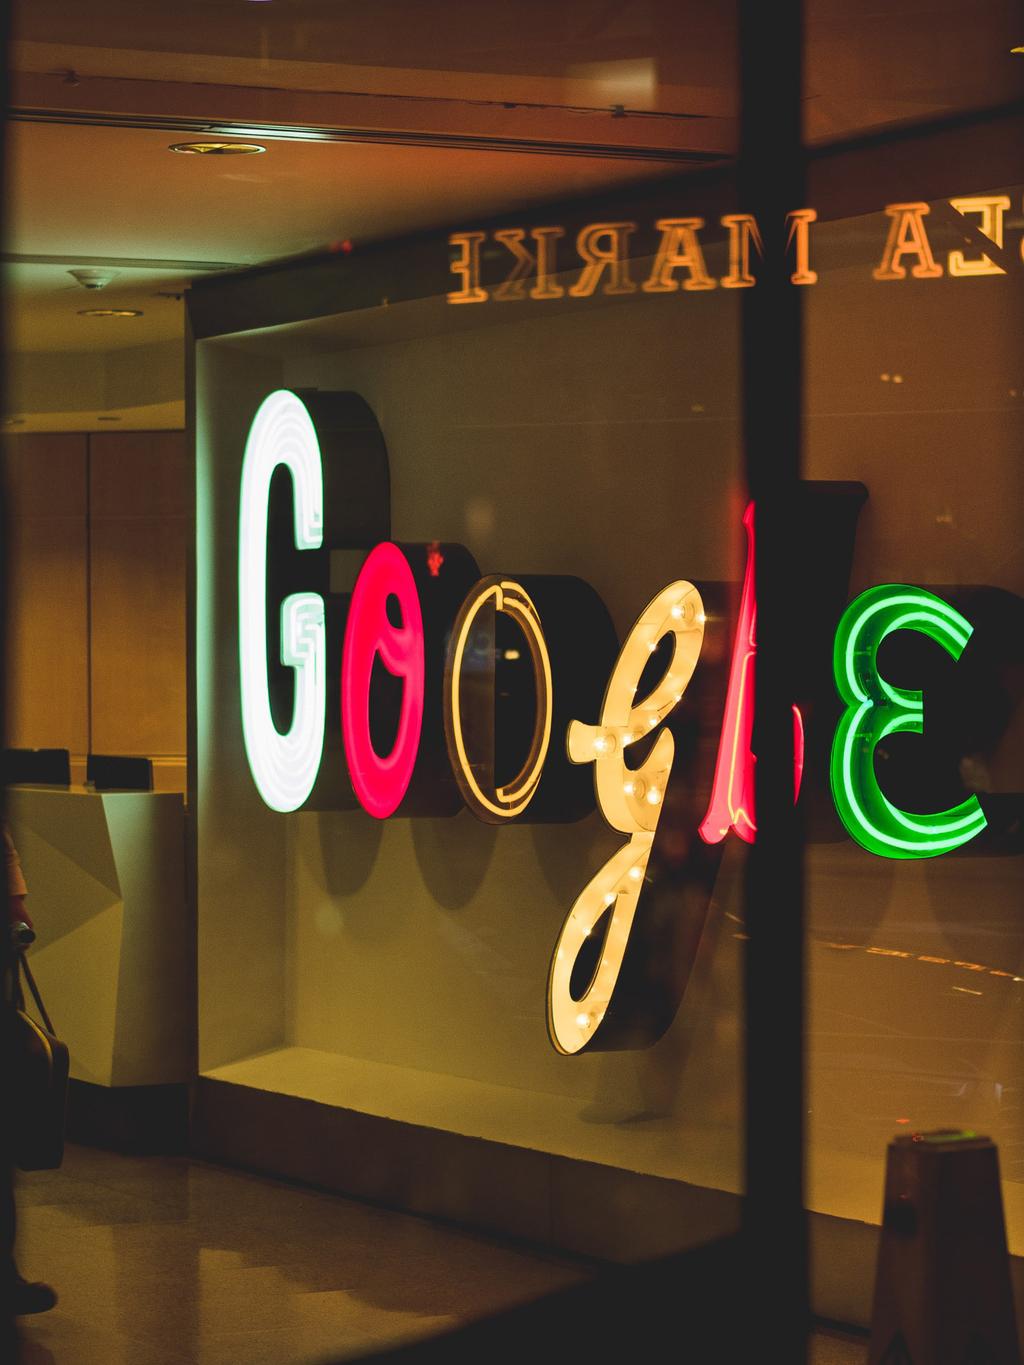 GOOGLE MOVES FROM ADVERTISING TO